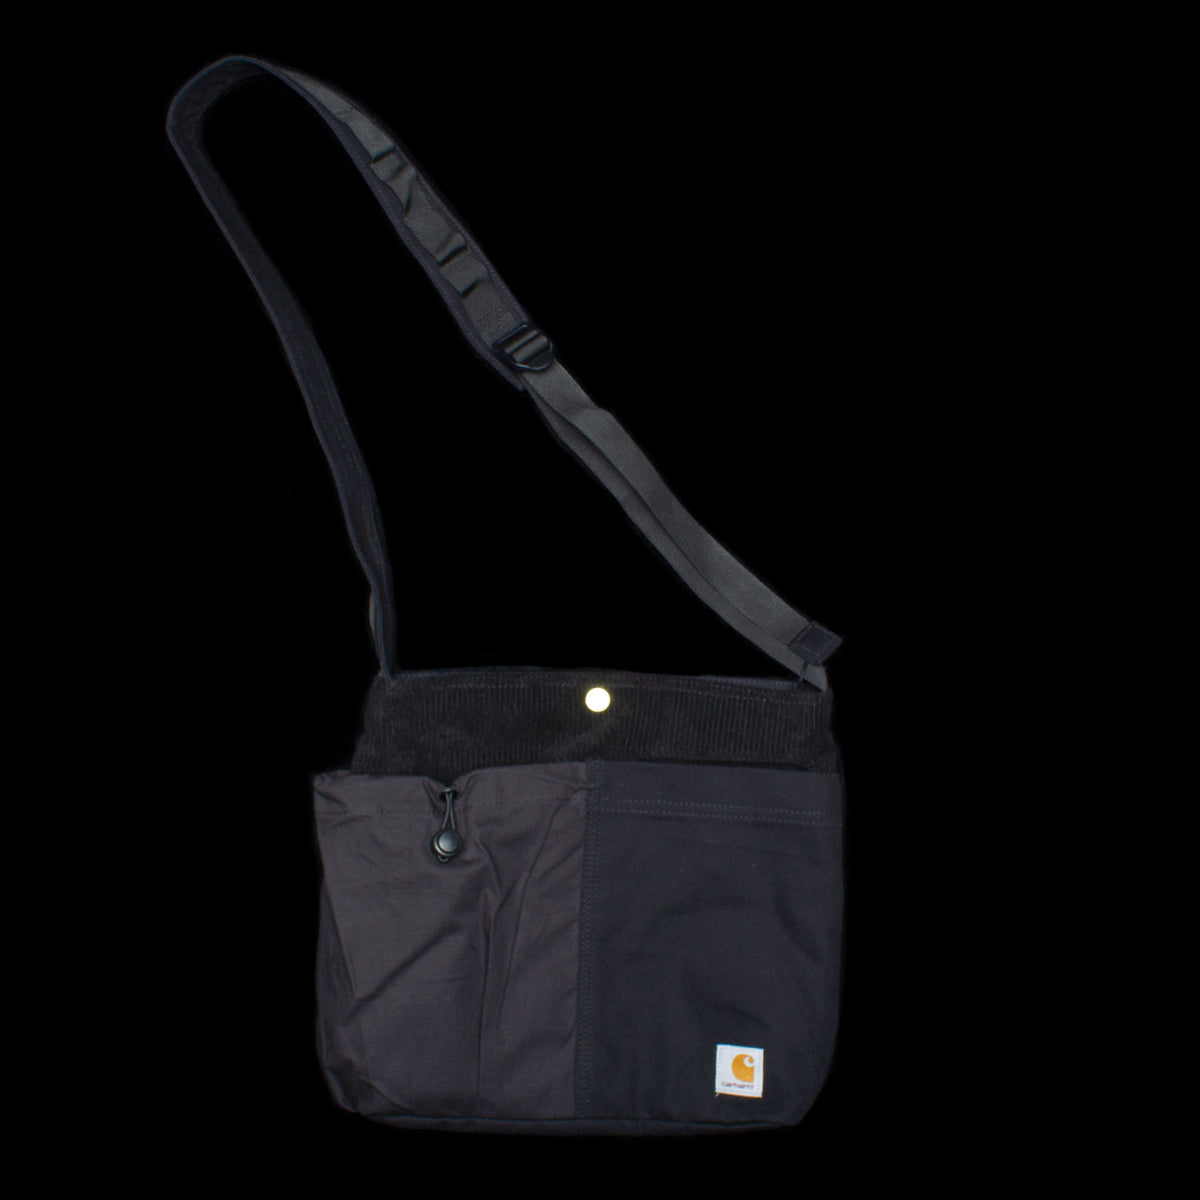 Carhartt WIP Medley Tote Bag WIP Black in Organic Cotton Dearborn Canvas,  360 g/sqm - US